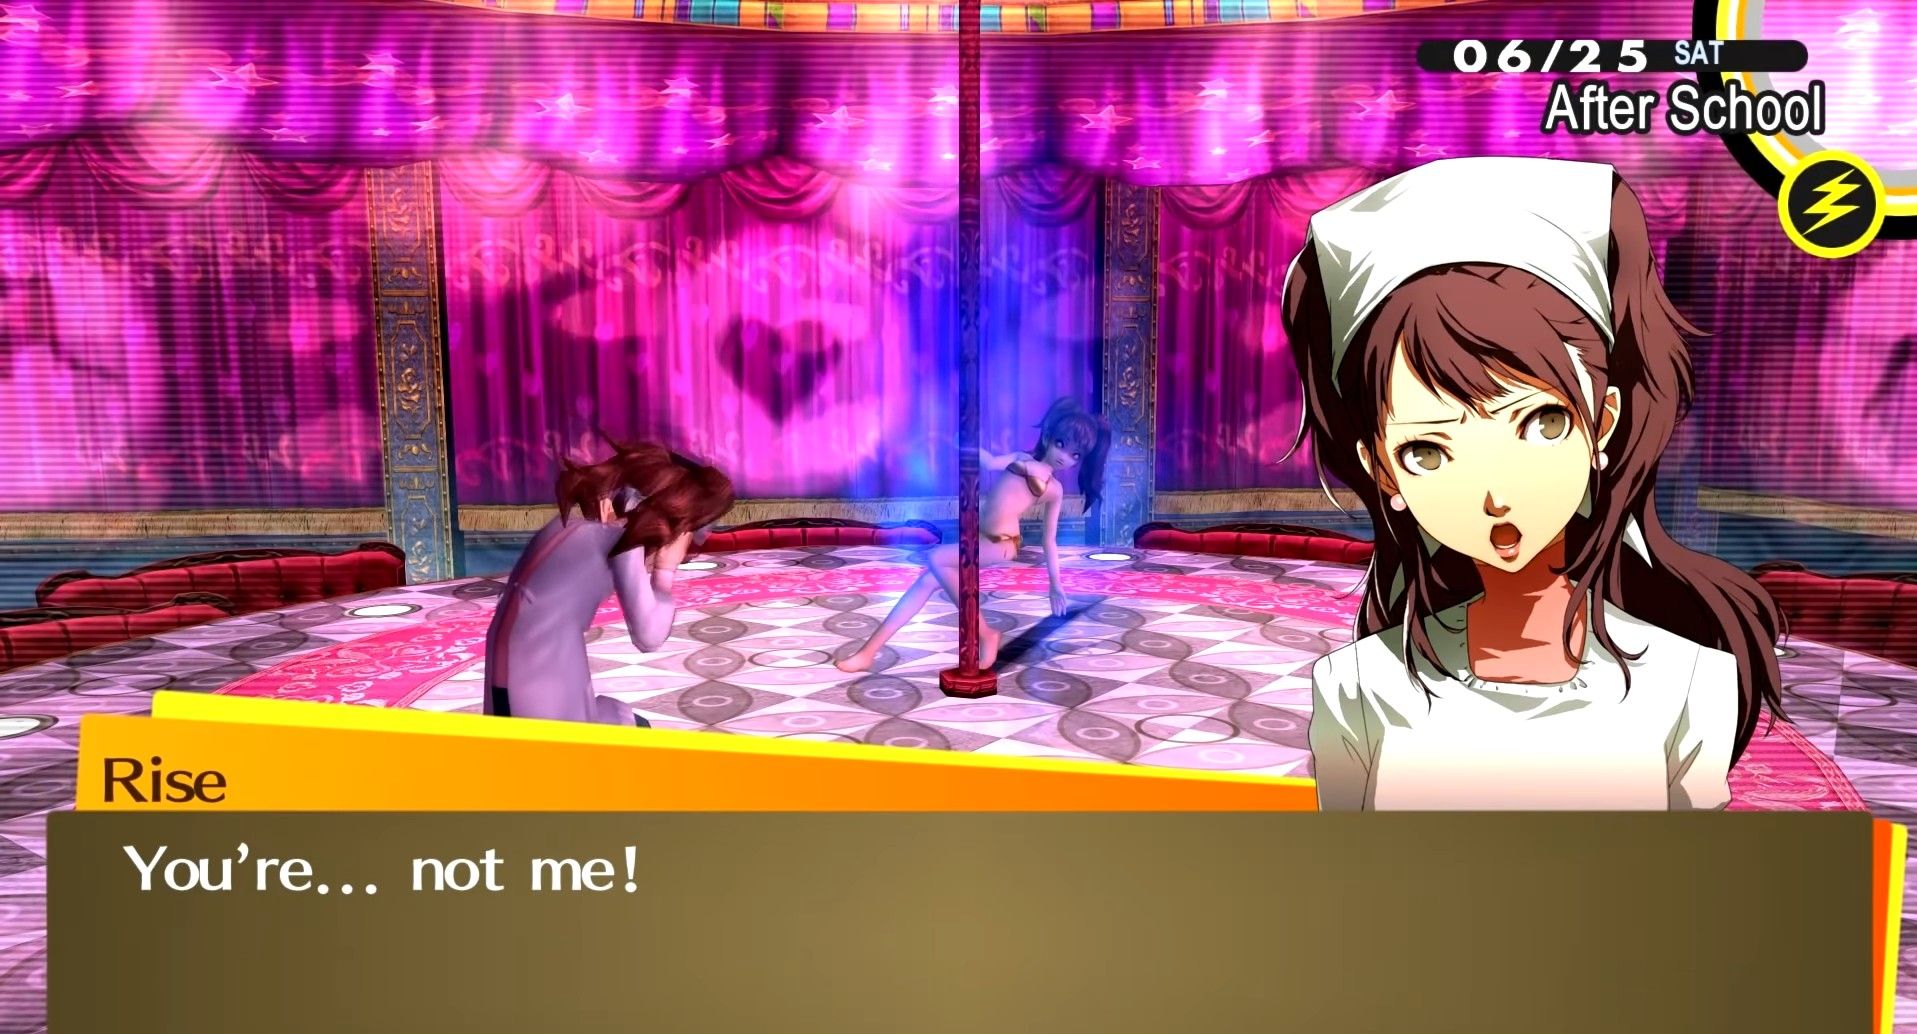 rise kujkawa denying her shadow self in the marukyu striptease dungeon in persona 4 golden